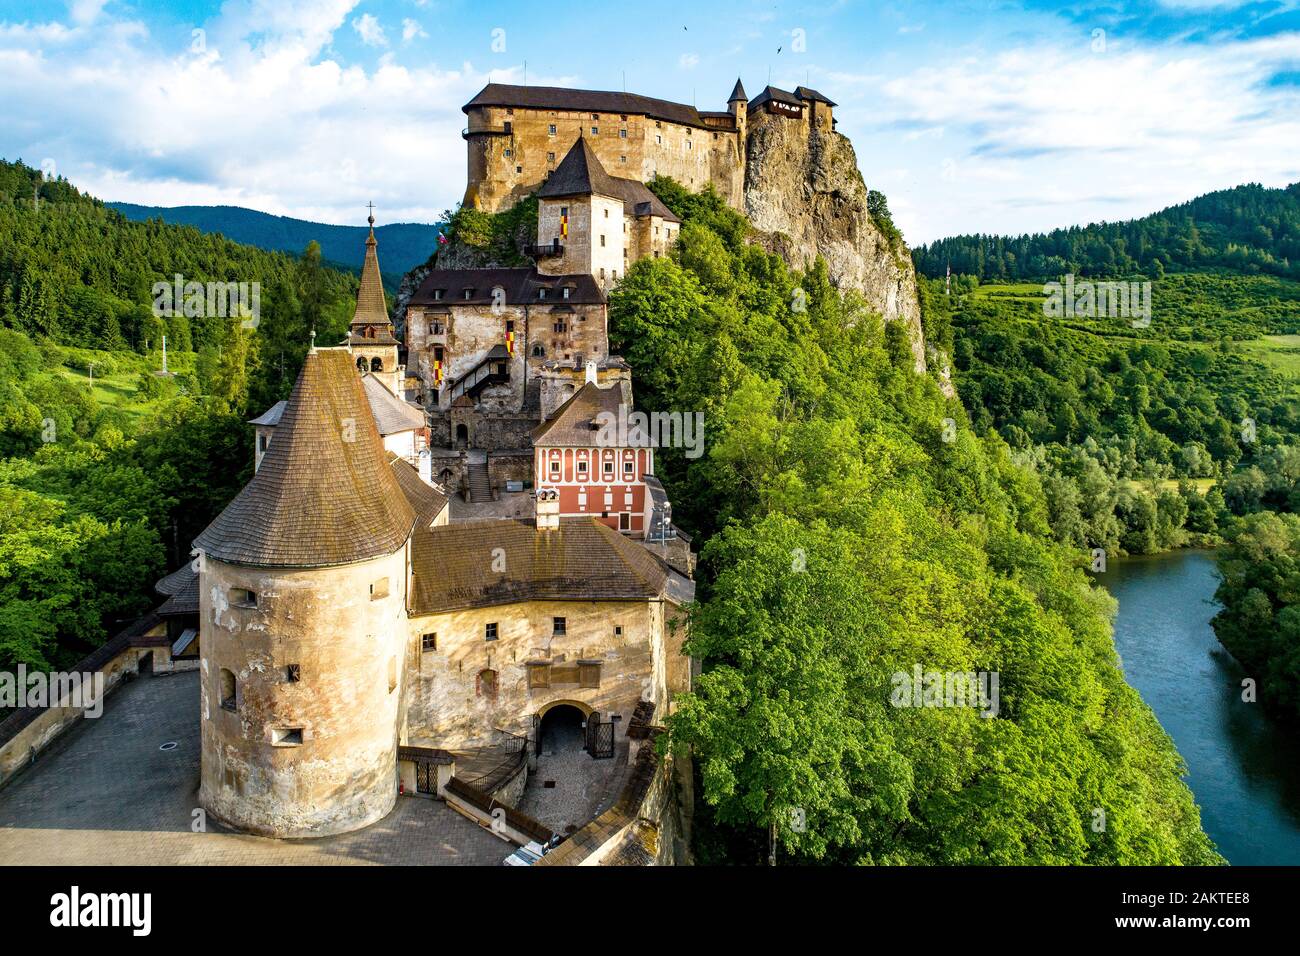 Orava castle - Oravsky Hrad in Oravsky Podzamok in Slovakia. Medieval stronghold on extremely high and steep cliff by the Orava river. Aerial view Stock Photo